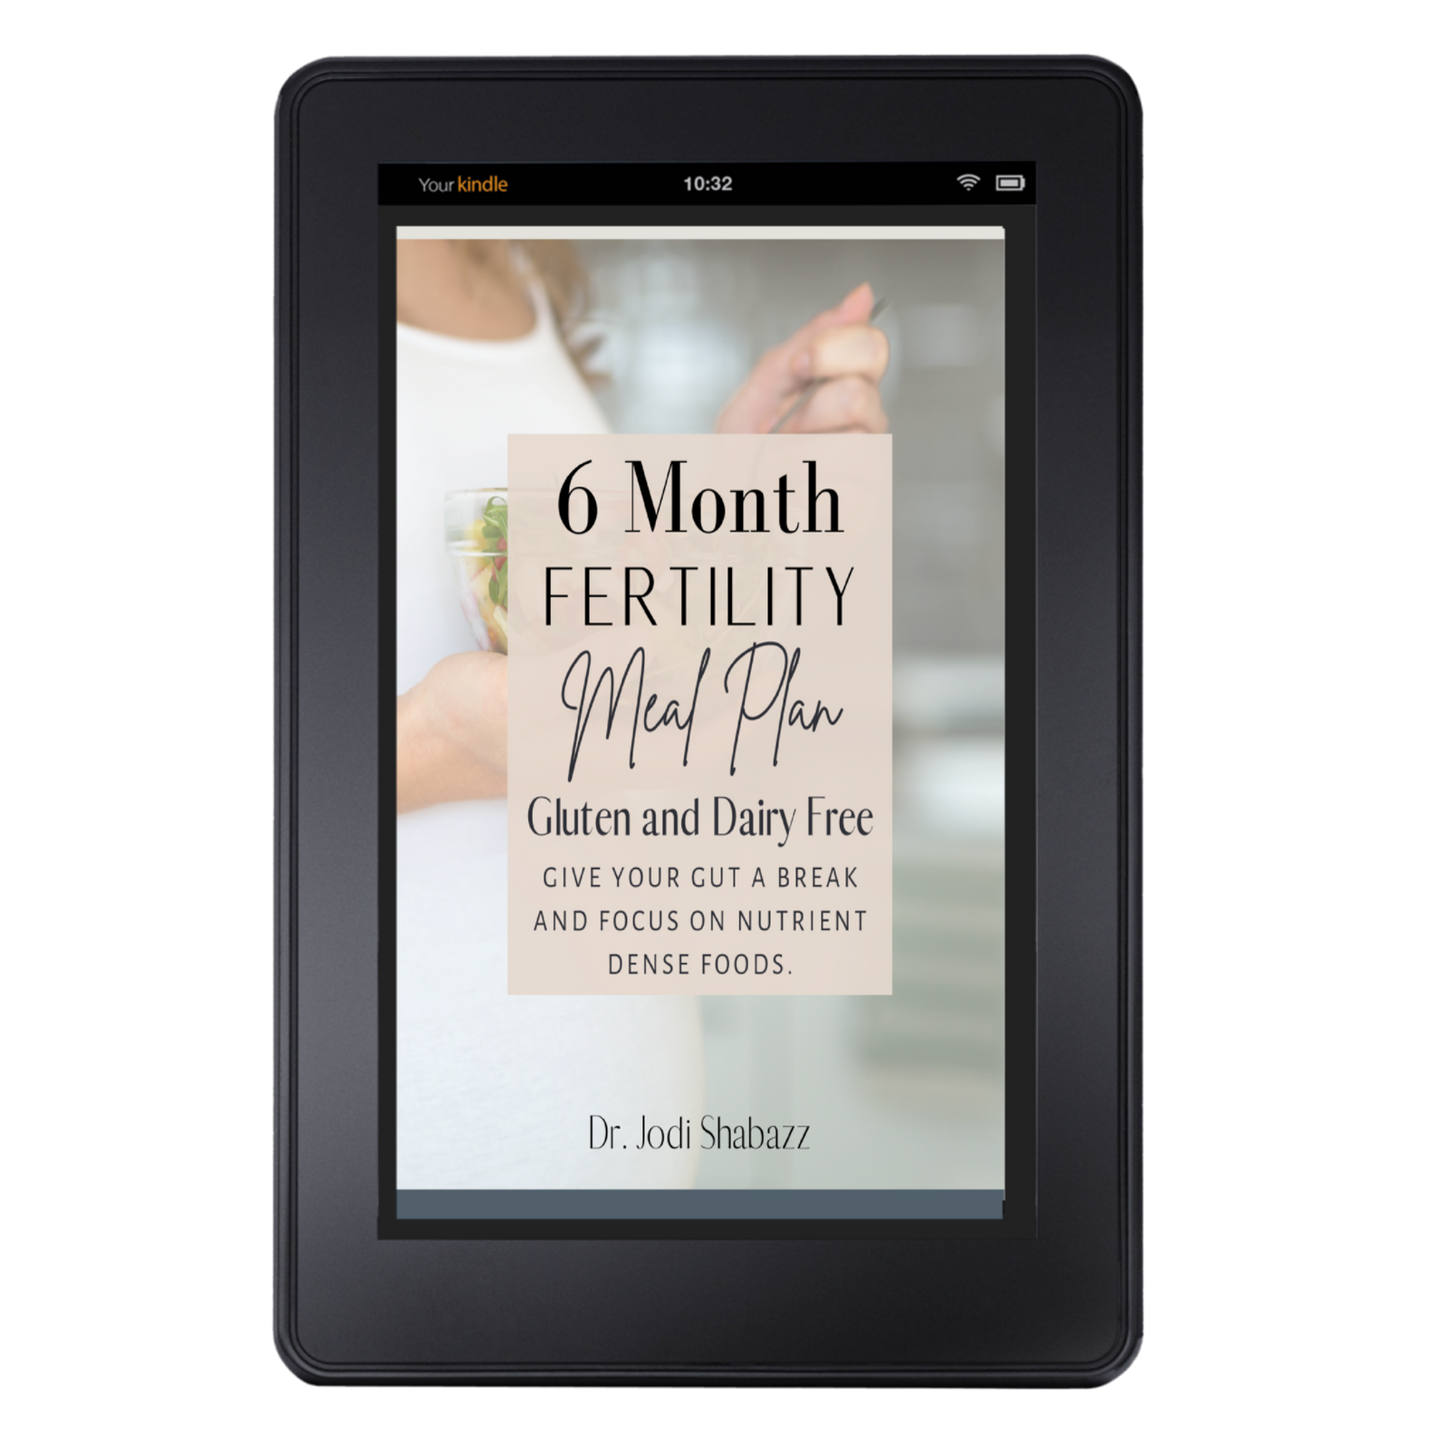 6 Month Fertility Meal Plan - Gluten and Dairy Free